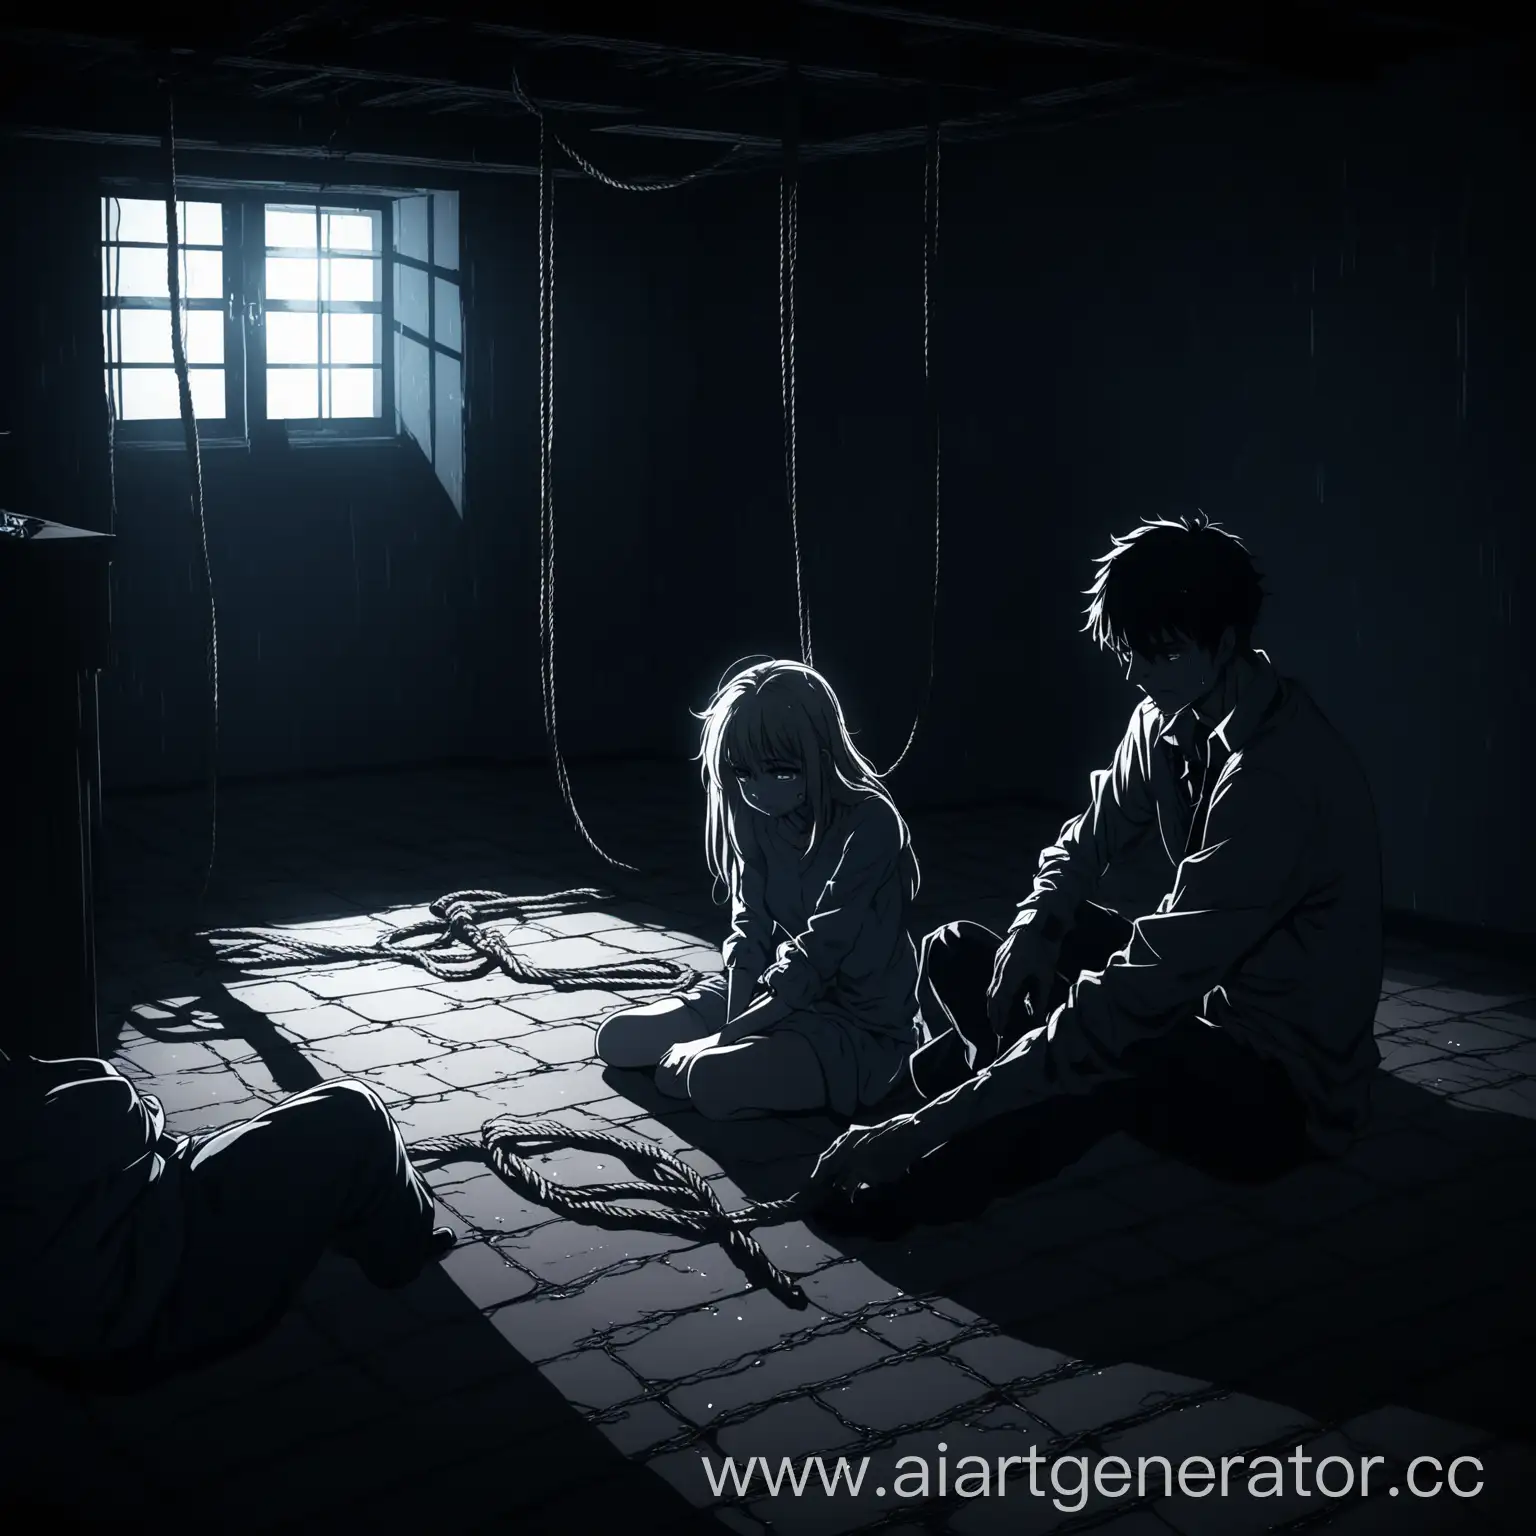 girlfriend sitting on the floor in the living room, in tears.
The man ties his girlfriend with ropes in a dark basement.
Contrast between a cozy apartment and a dark, damp basement.
Use of light and shadow to create a tense atmosphere.
Anime style